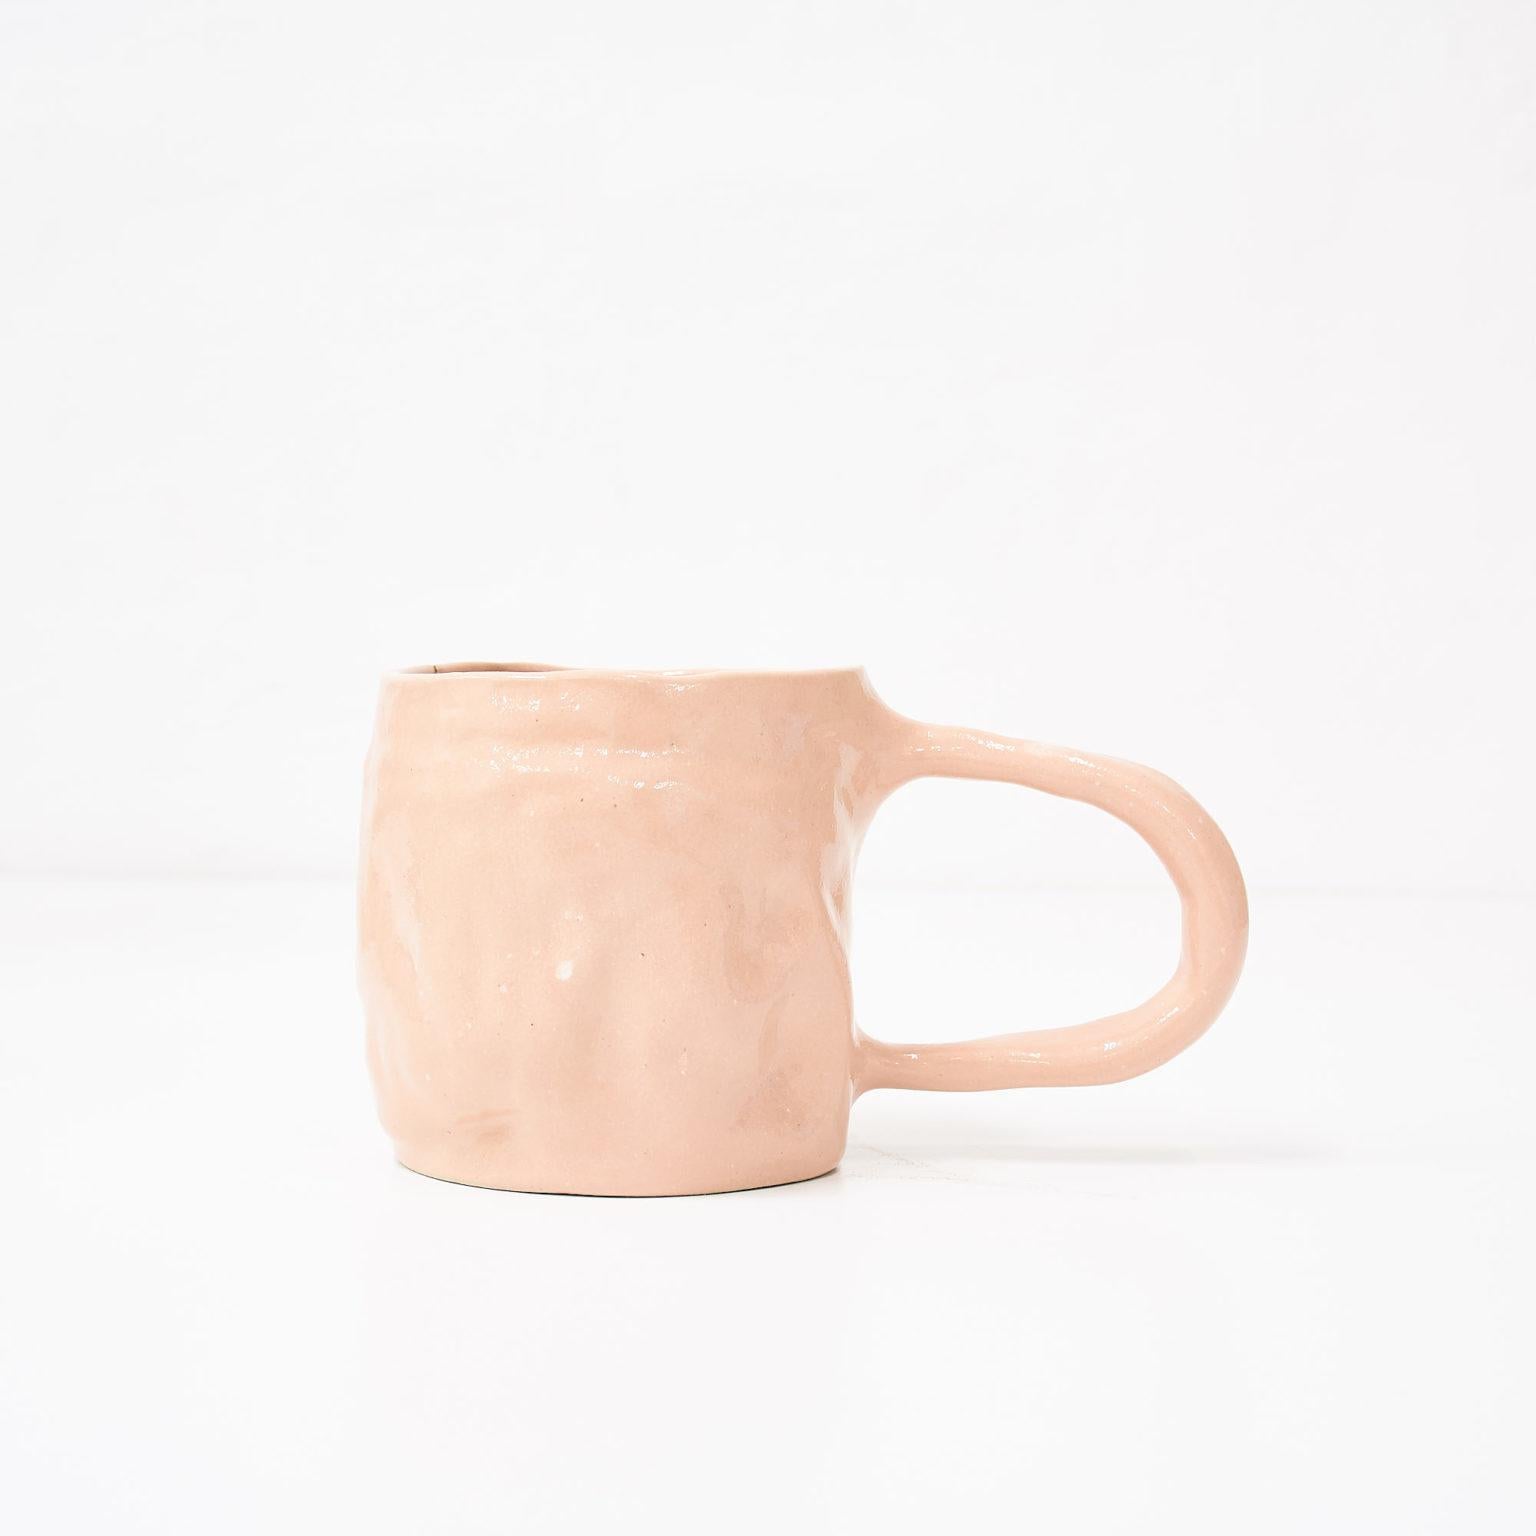 Big ear mug by Siup Studio.
Dimensions: D9 x W16 x H8cm.
Materials: Ceramics.

Siup is a small design studio based in Warsaw. The concept is created by three friends – Martyna Dymek, Marcin Sieczka and Kasia Skoczylas – who have met in